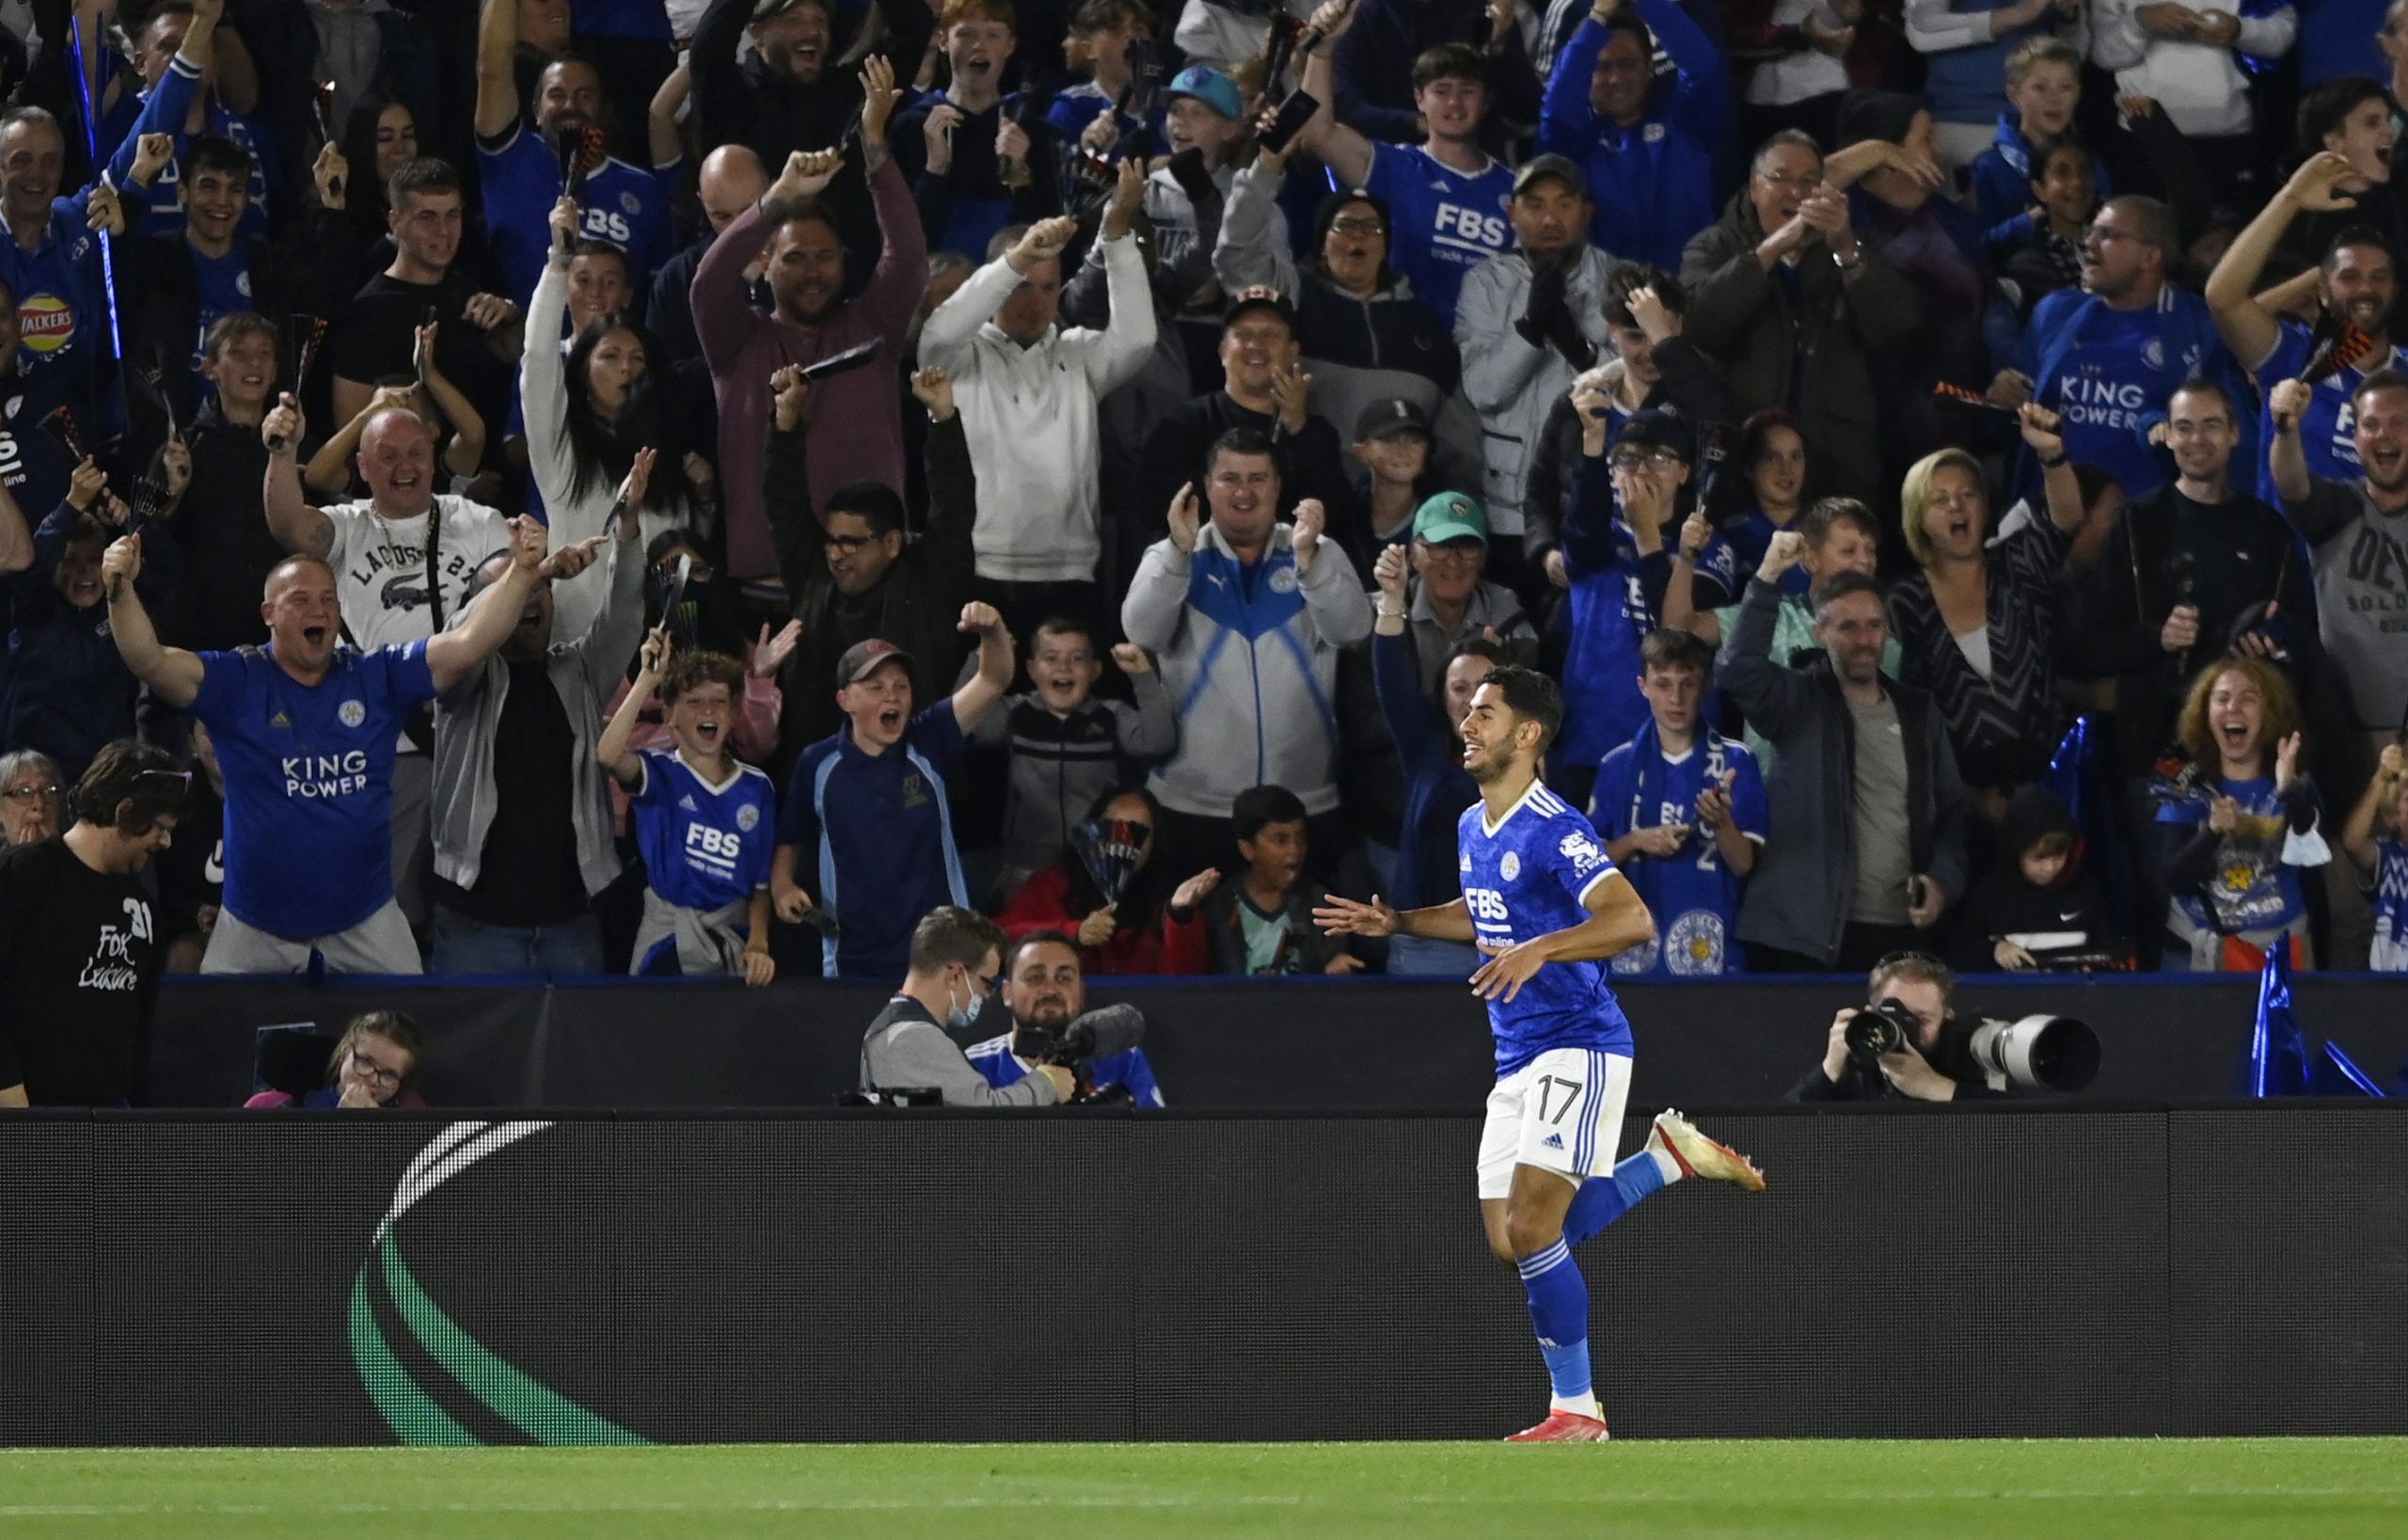 Soccer Football - Europa League - Group C - Leicester City v Napoli - King Power Stadium, Leicester, Britain - September 16, 2021 Leicester City's Ayoze Perez celebrates scoring their first goal REUTERS/Tony Obrien